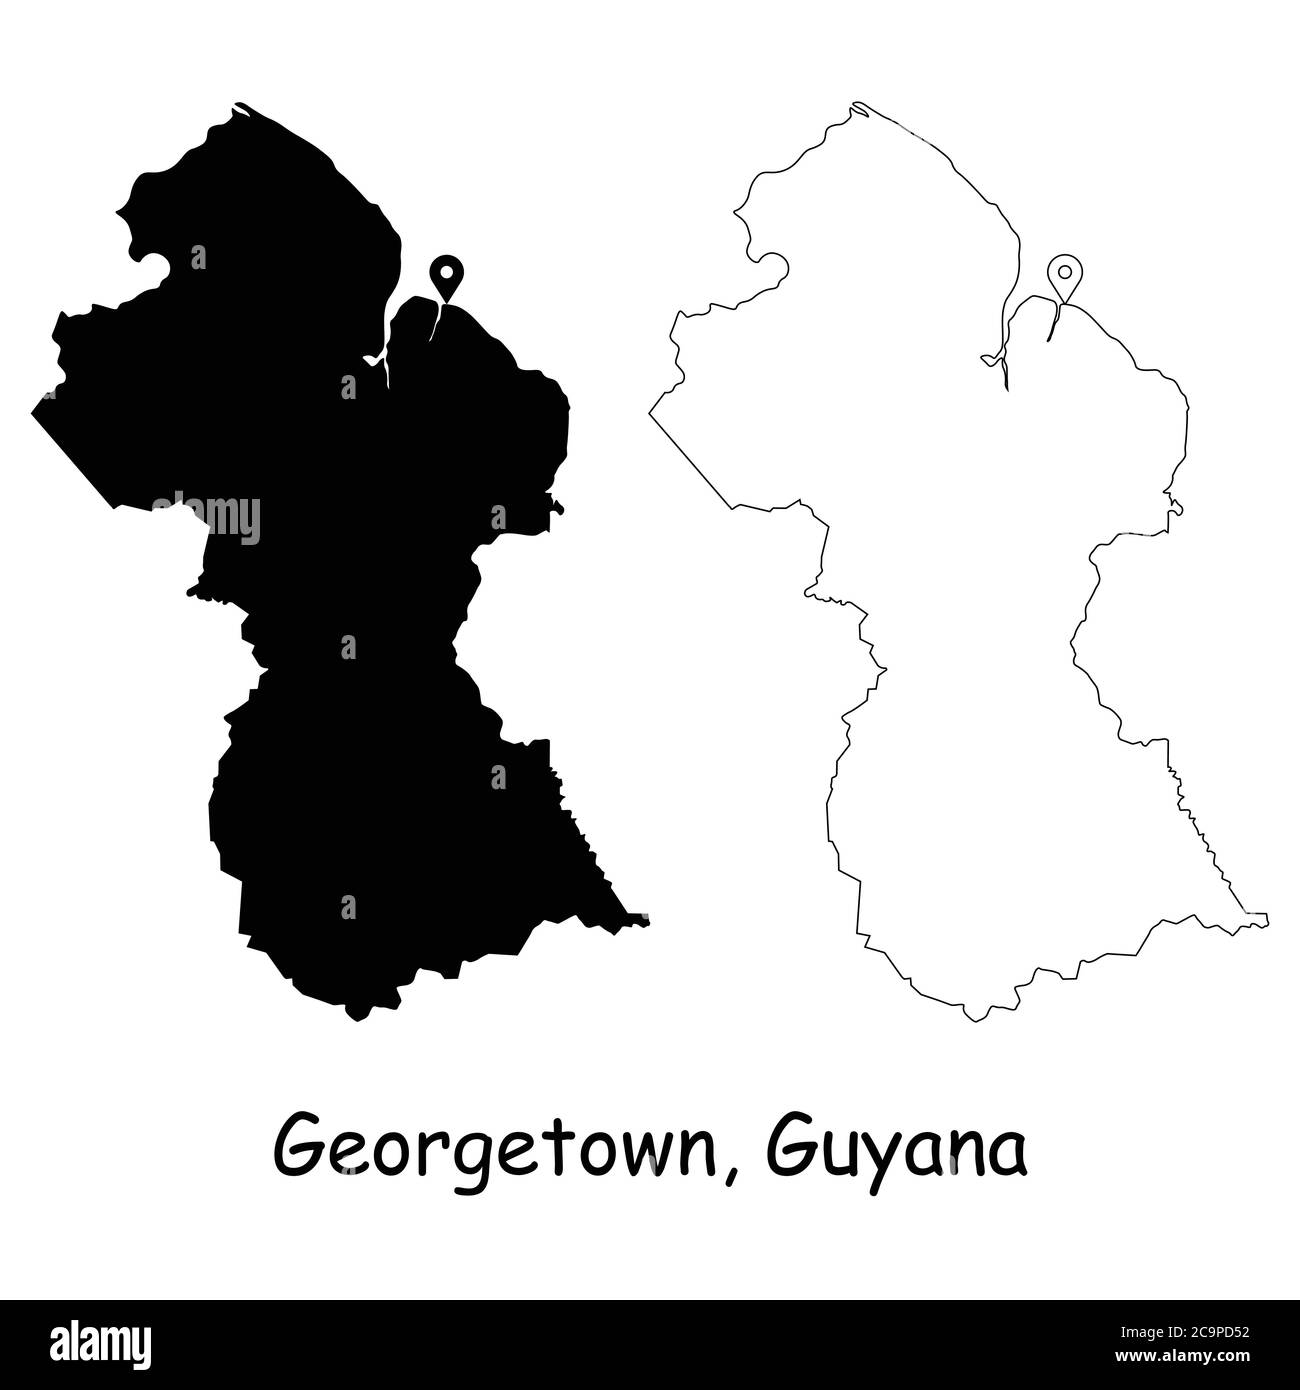 Georgetown Guyana. Detailed Country Map with Location Pin on Capital City. Black silhouette and outline maps isolated on white background. EPS Vector Stock Vector